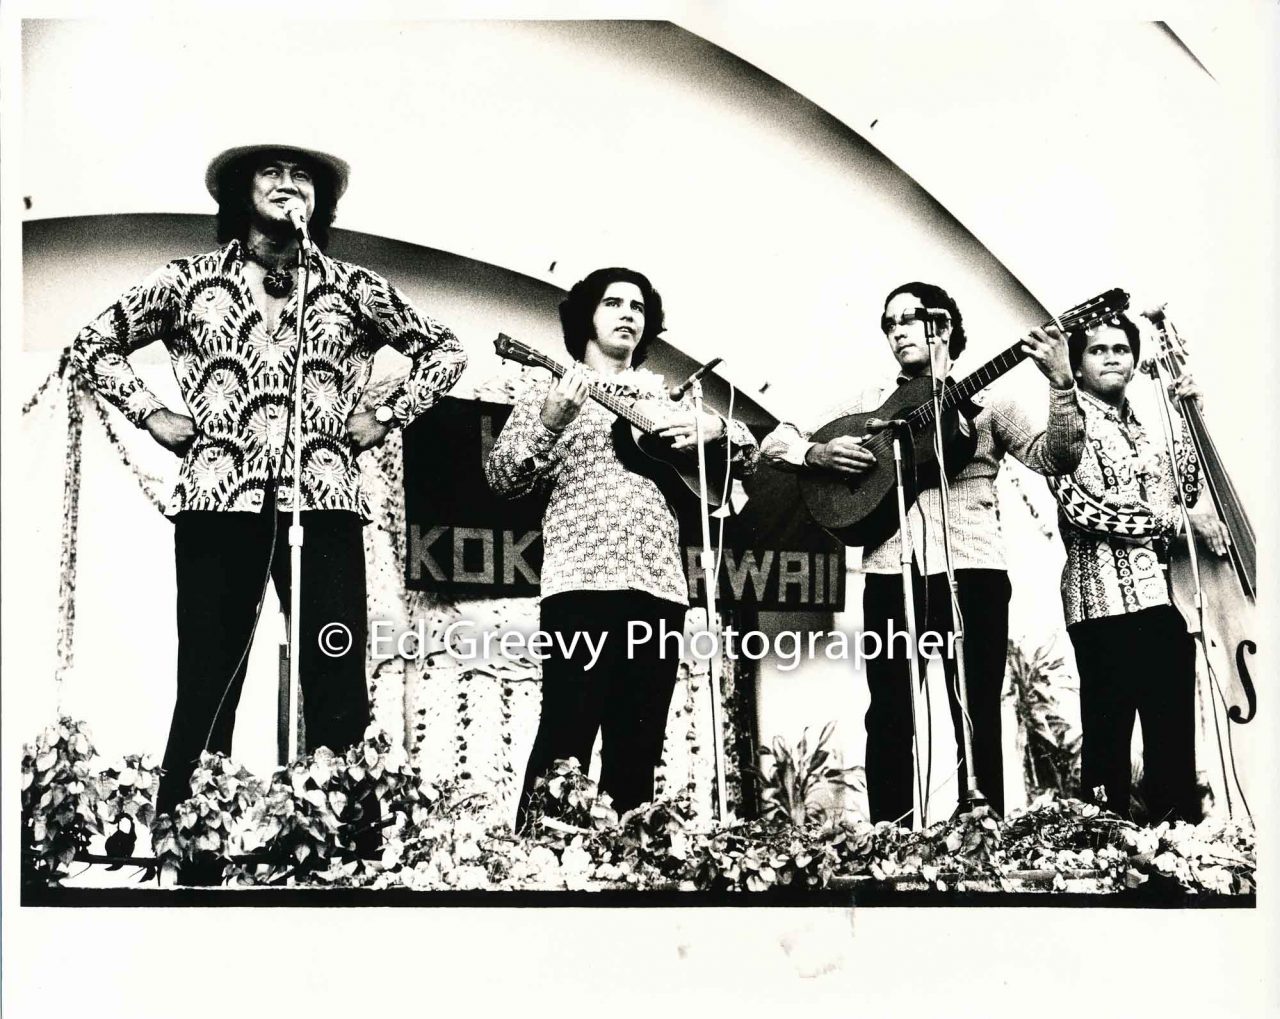 Geroge Helm (second from right) performs for a Kokua Hawaiʻi fundraiser at the Waikiki Shell.  (1973)